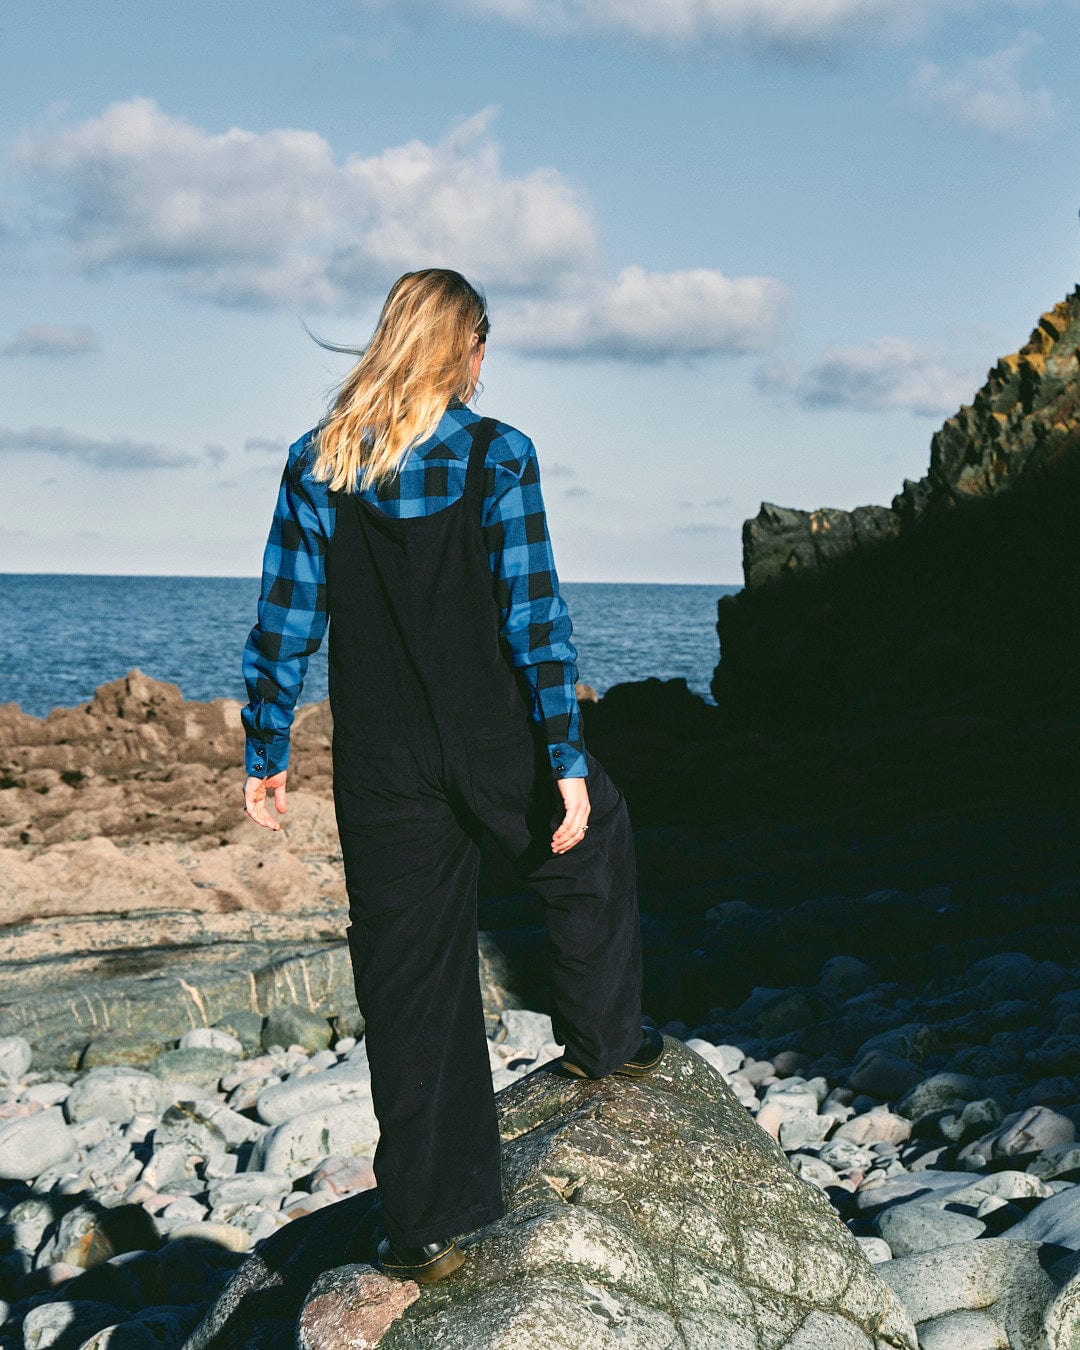 A fashion-conscious woman with long hair, wearing a blue checkered shirt and Saltrock's Nancy - Womens Cord Jumpsuit - Dark Blue, stands on a rocky coastline looking out towards the sea.